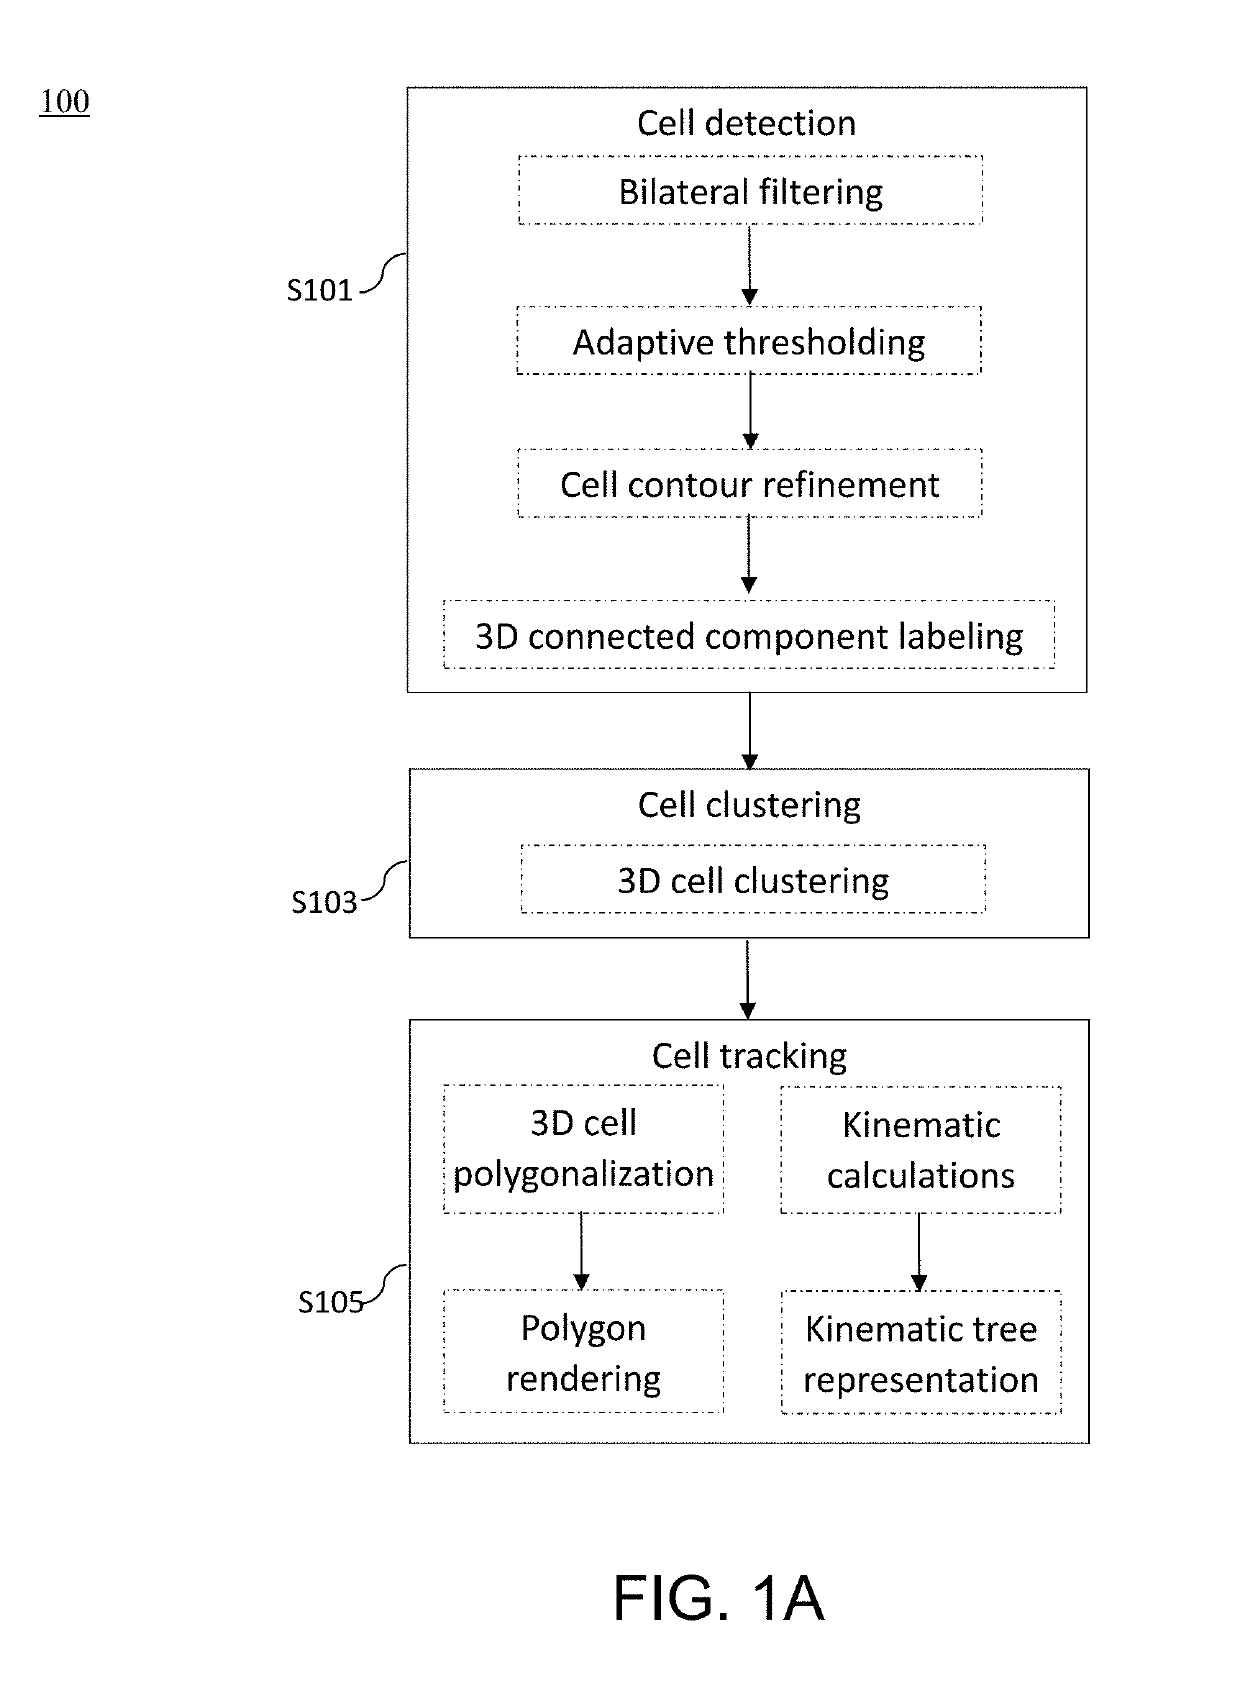 Method and apparatus for image processing and visualization for analyzing cell kinematics in cell culture